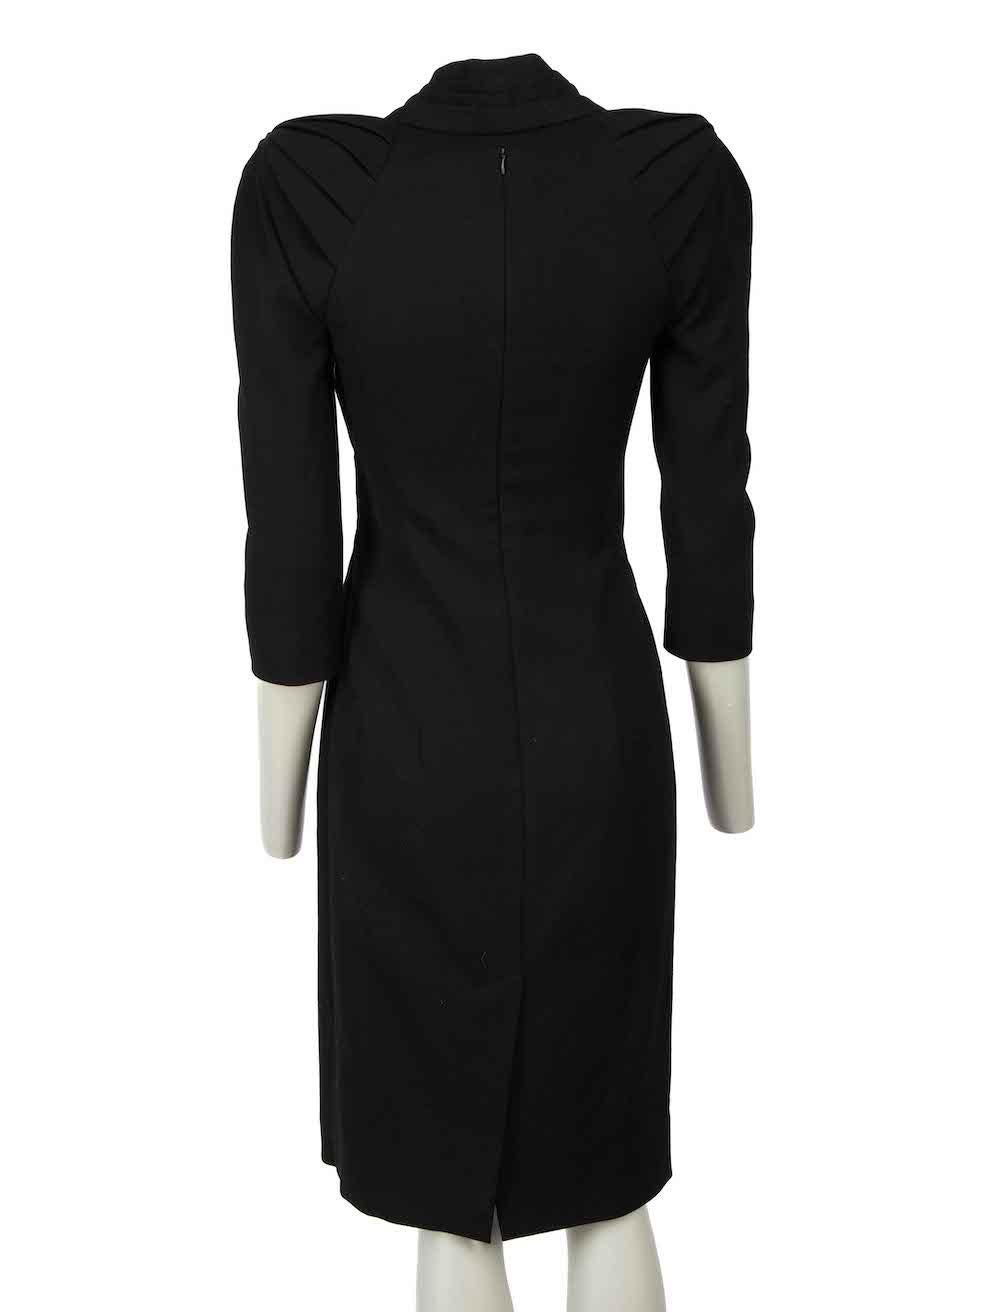 Alexander McQueen Black Wool Shoulder Pad Dress Size XS In Excellent Condition For Sale In London, GB